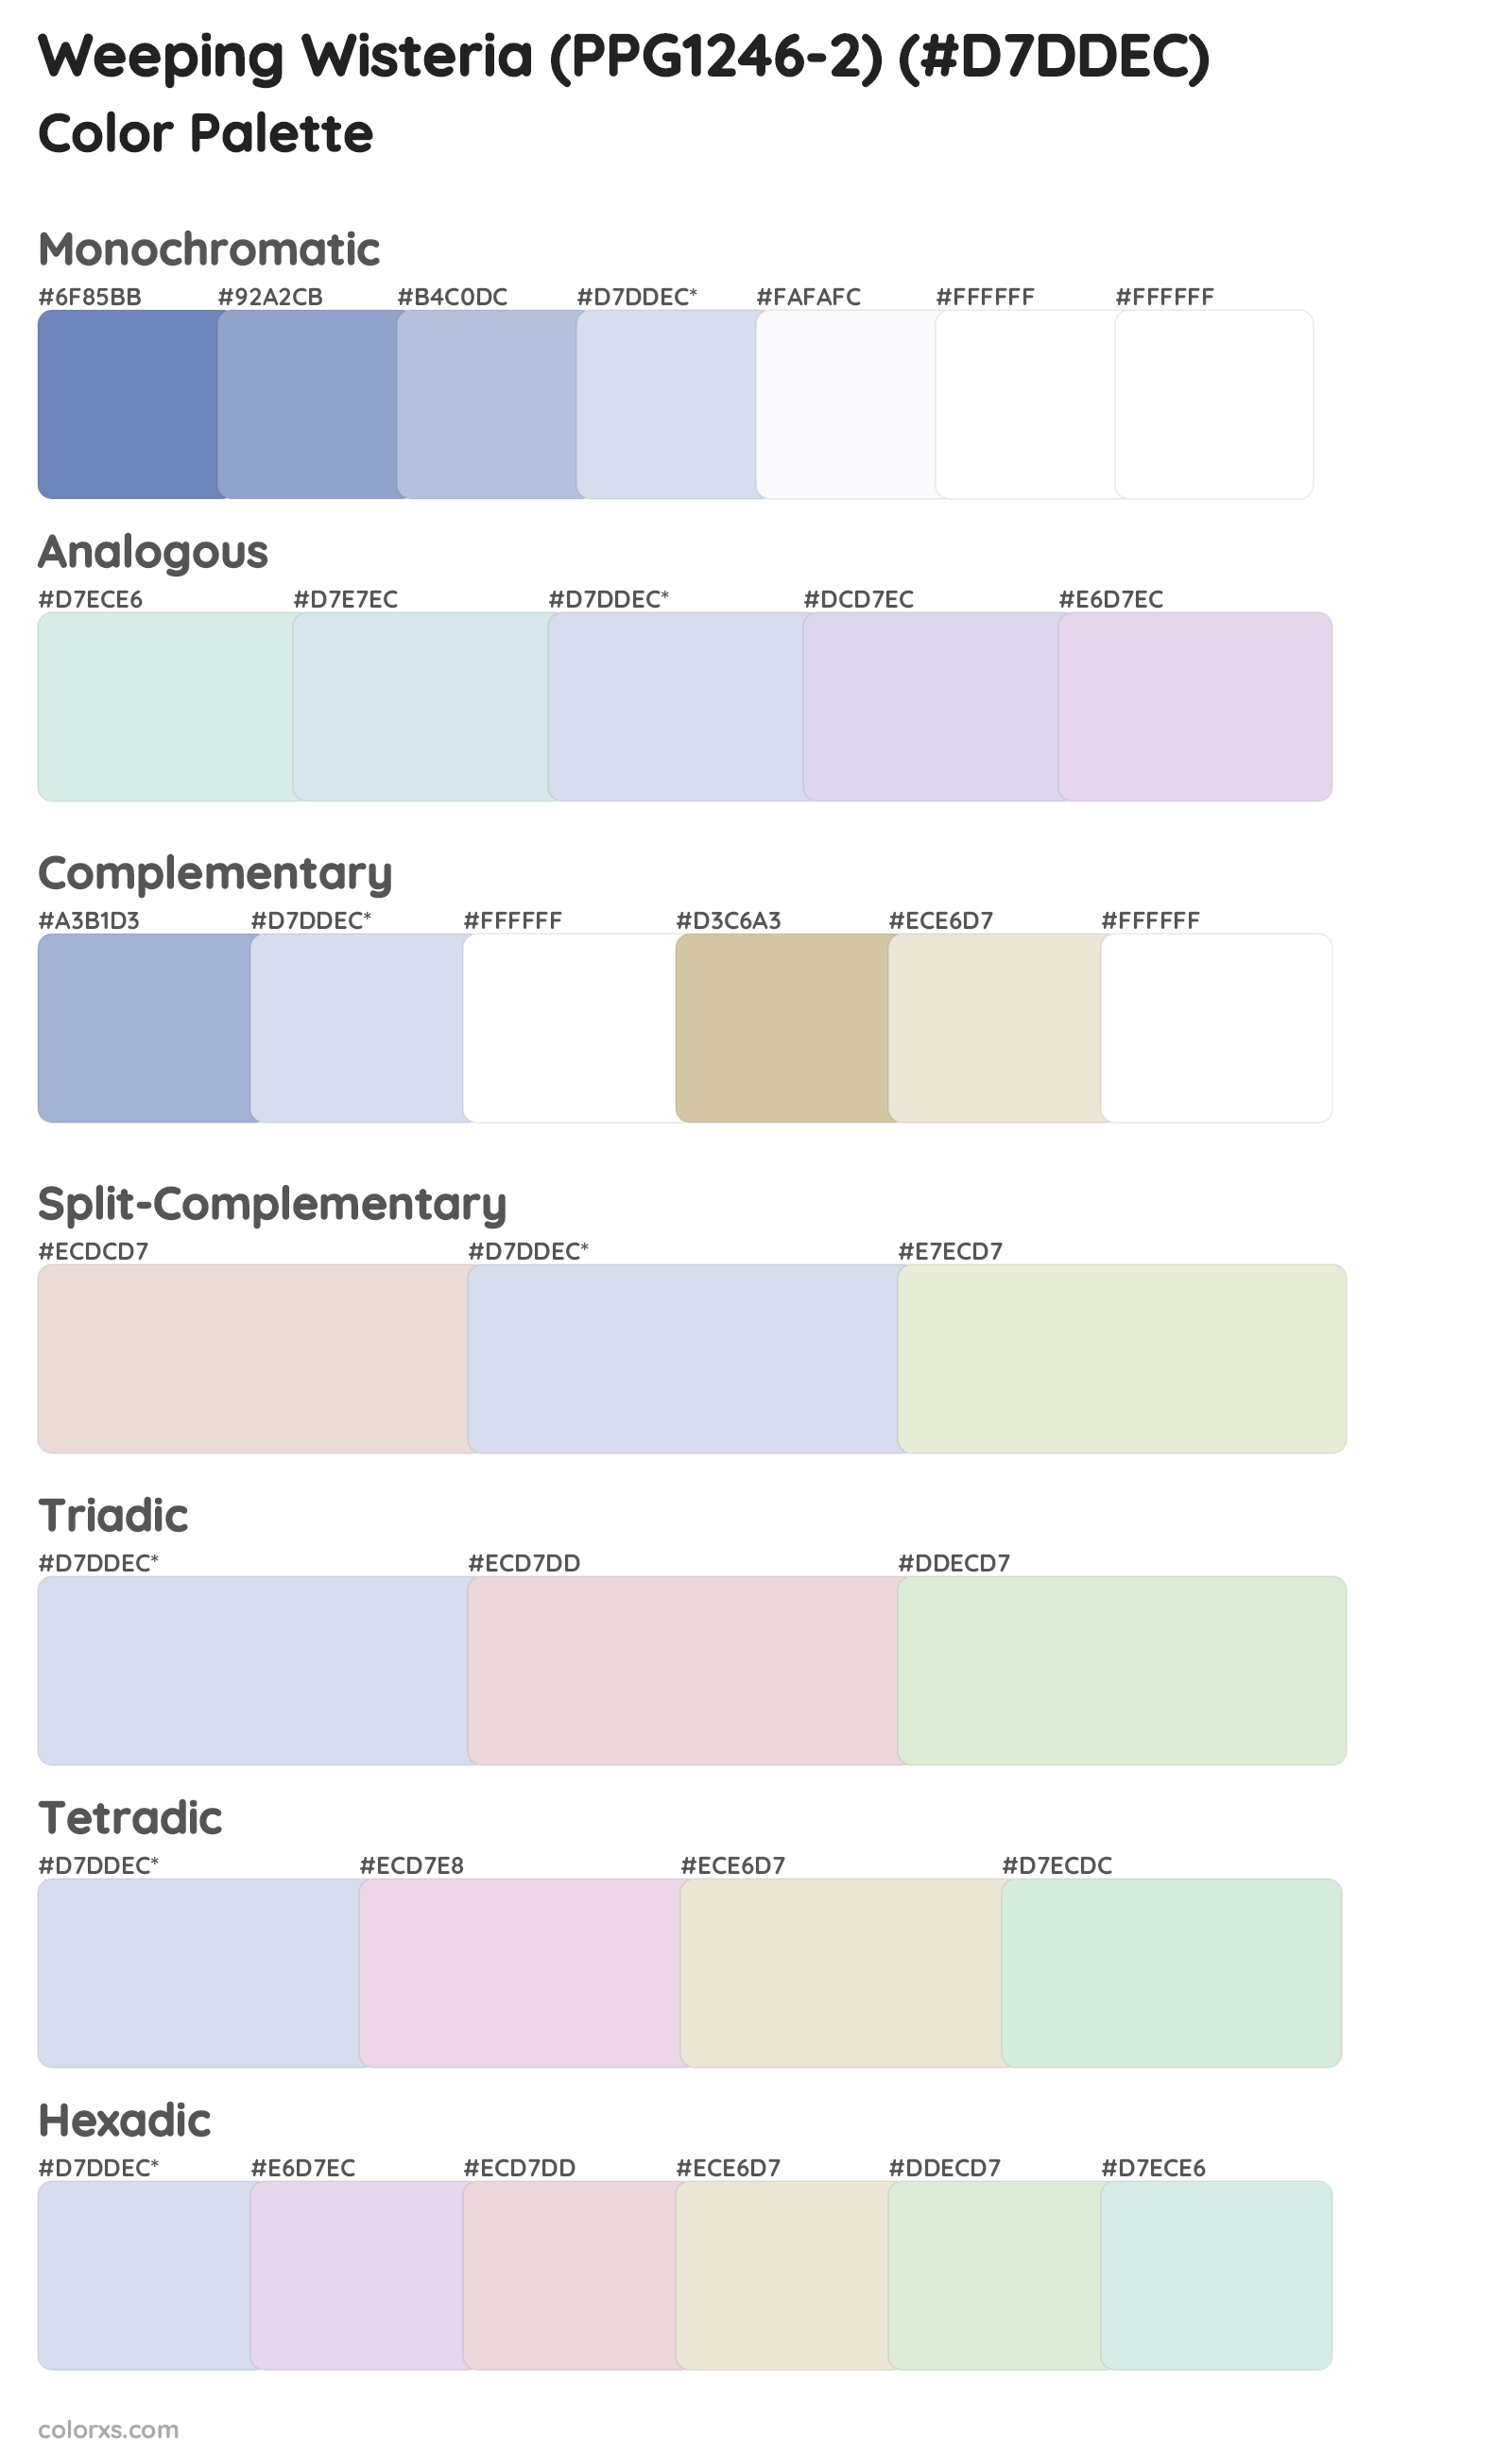 Weeping Wisteria (PPG1246-2) Color Scheme Palettes